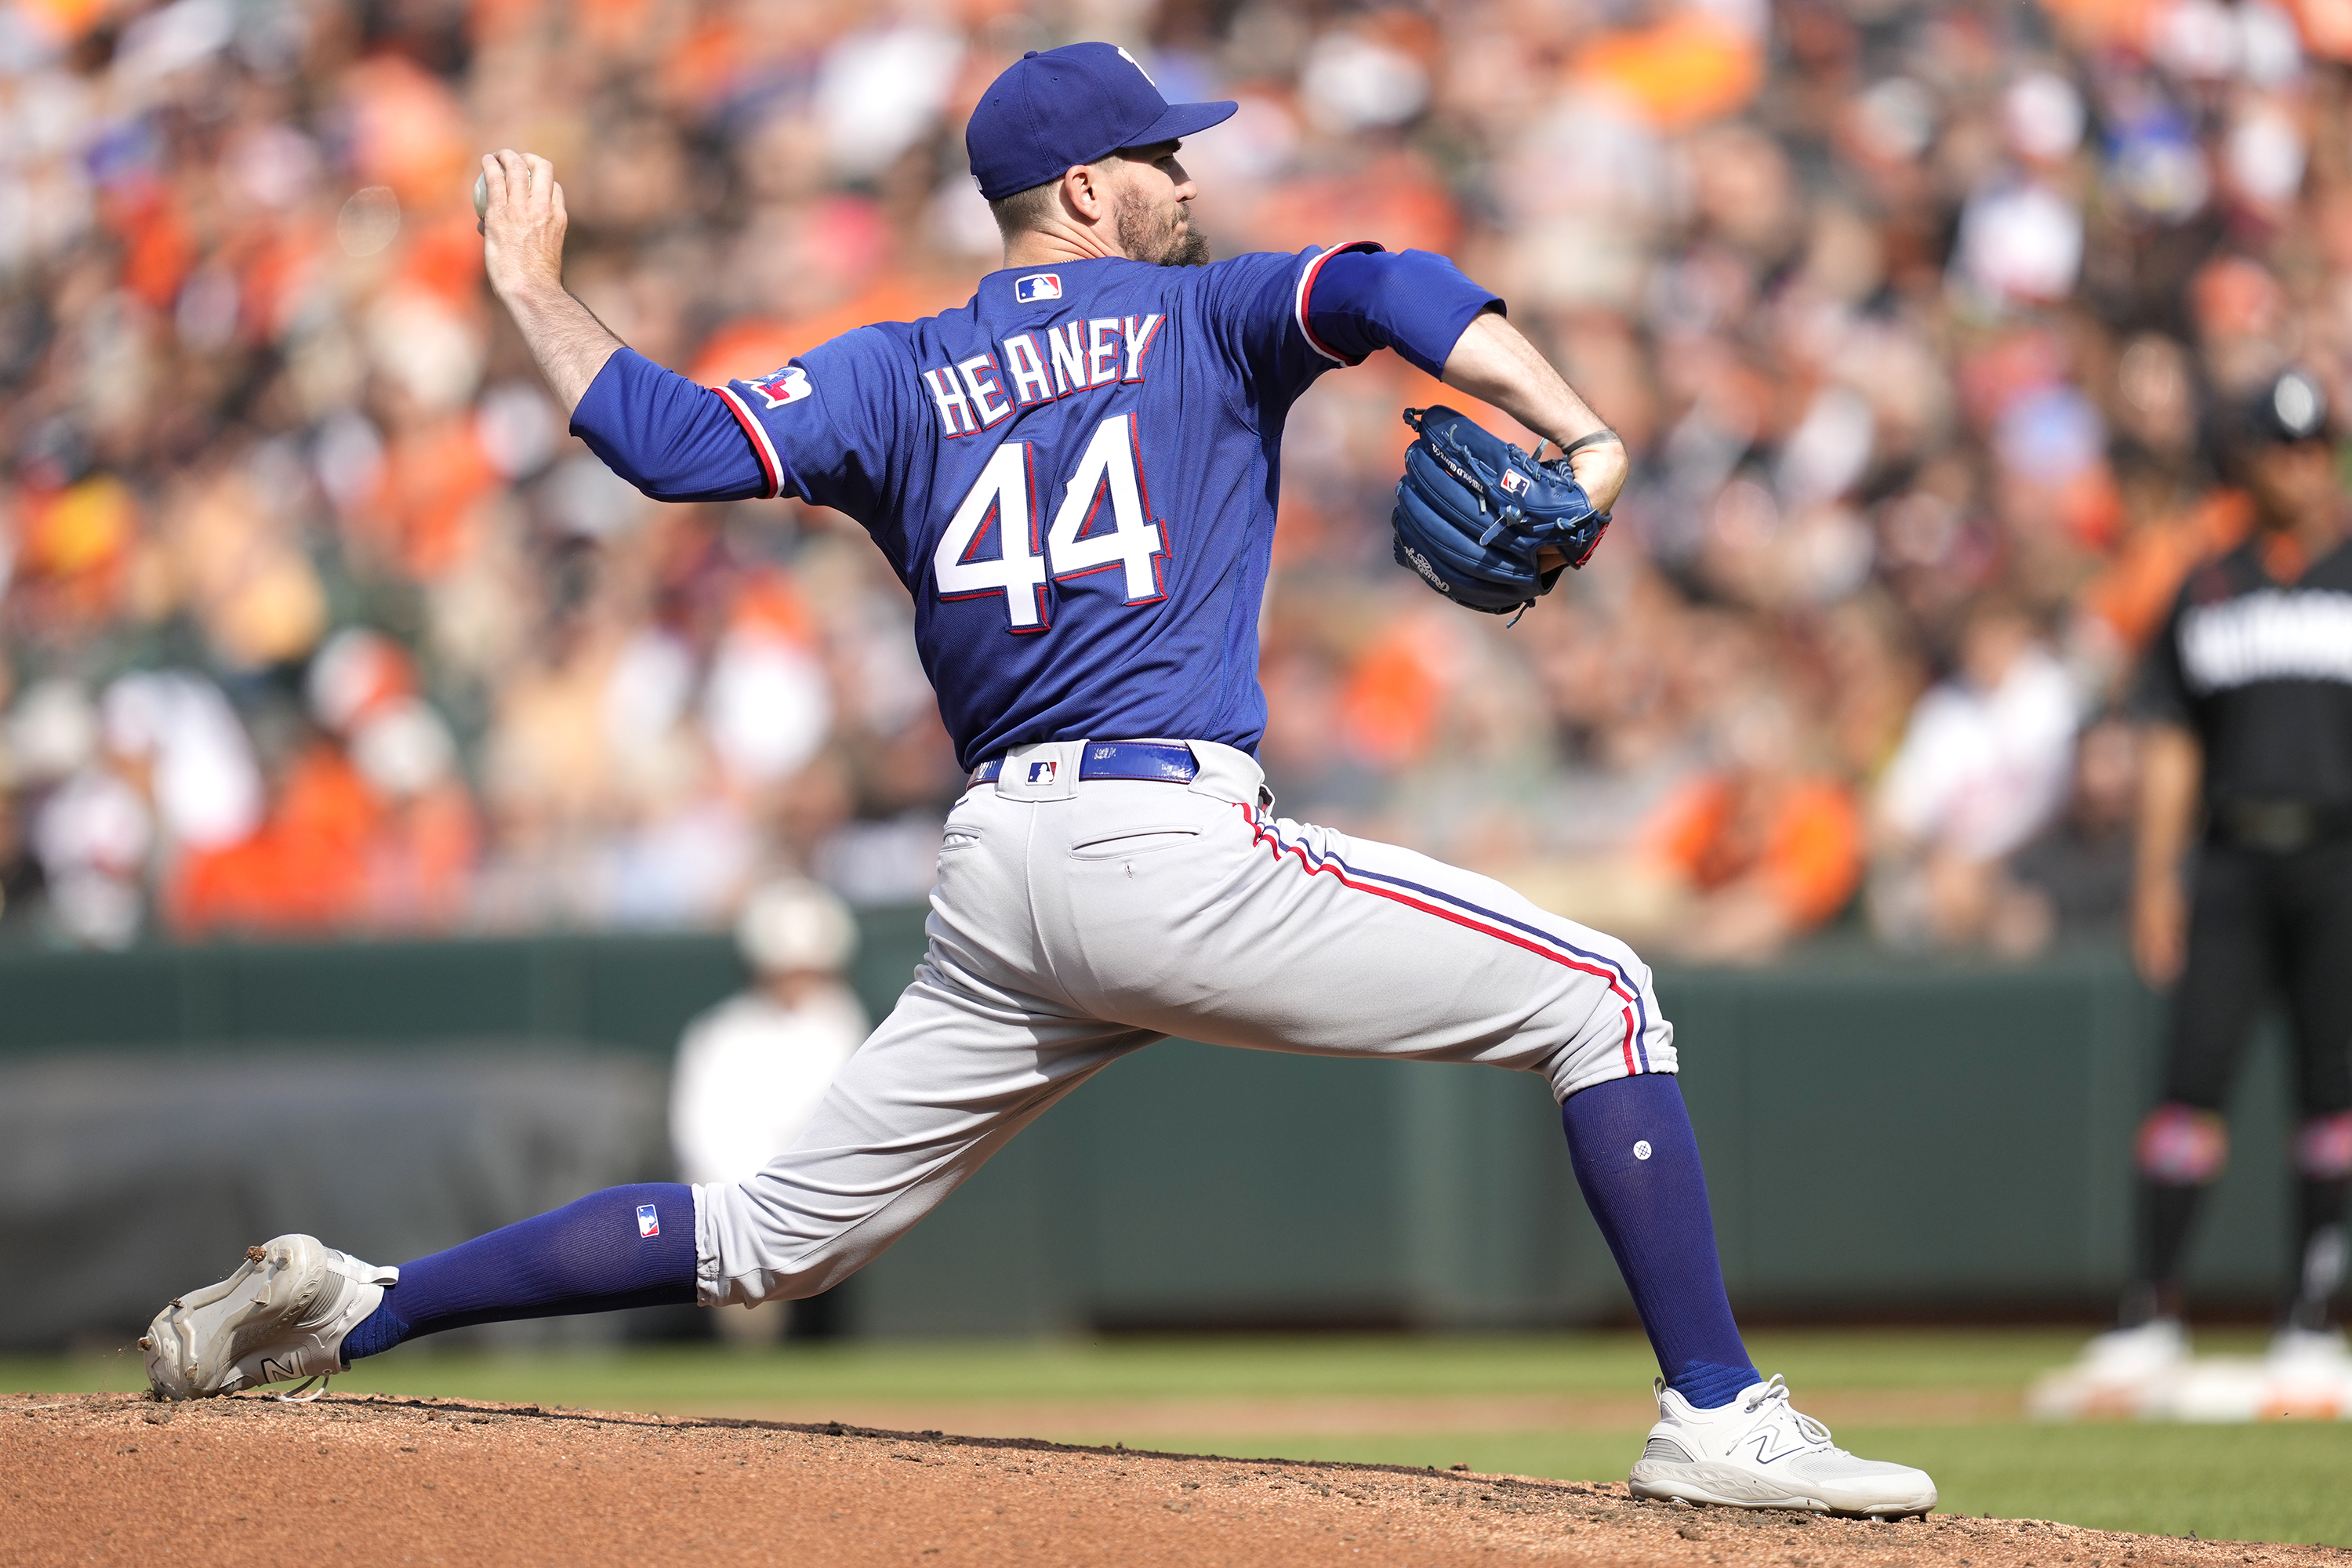 Andrew Heaney #44 of the Texas Rangers pitches in the fourth inning during a baseball game against the Baltimore Orioles at Oriole Park at Camden Yards on May 27, 2023 in Baltimore, Maryland.